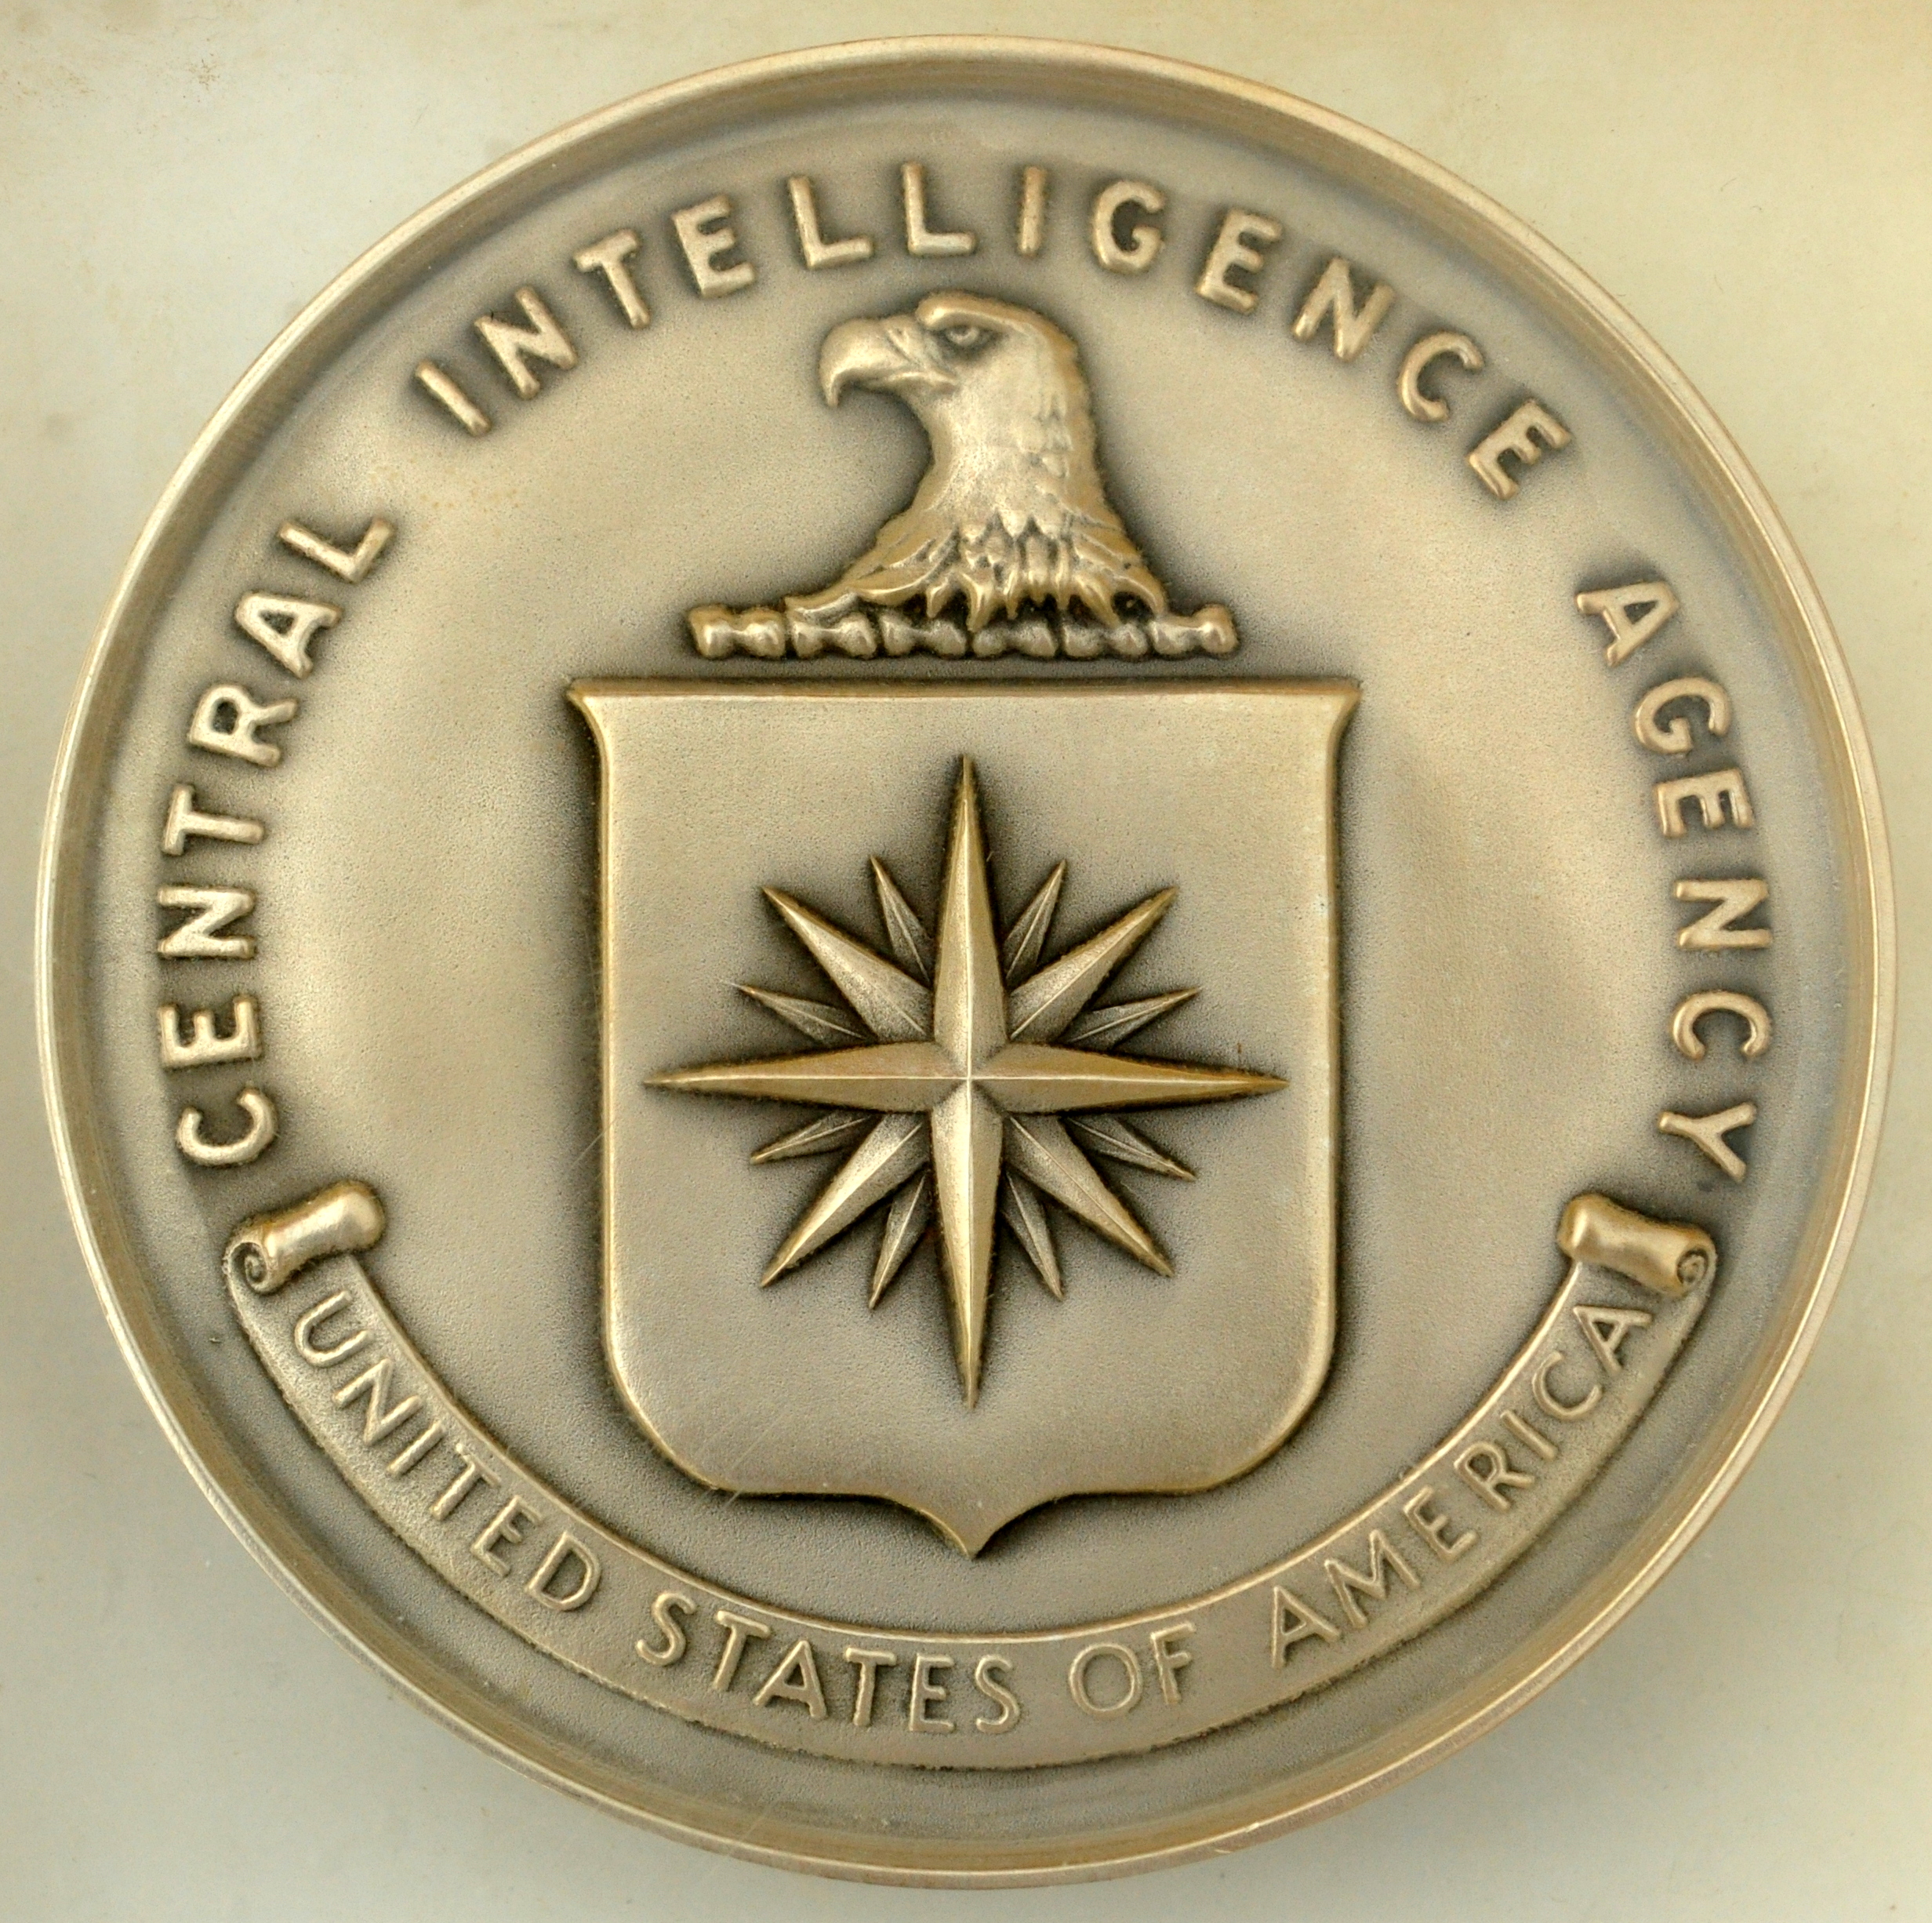 John W. McConnell’s CIA medal (front)